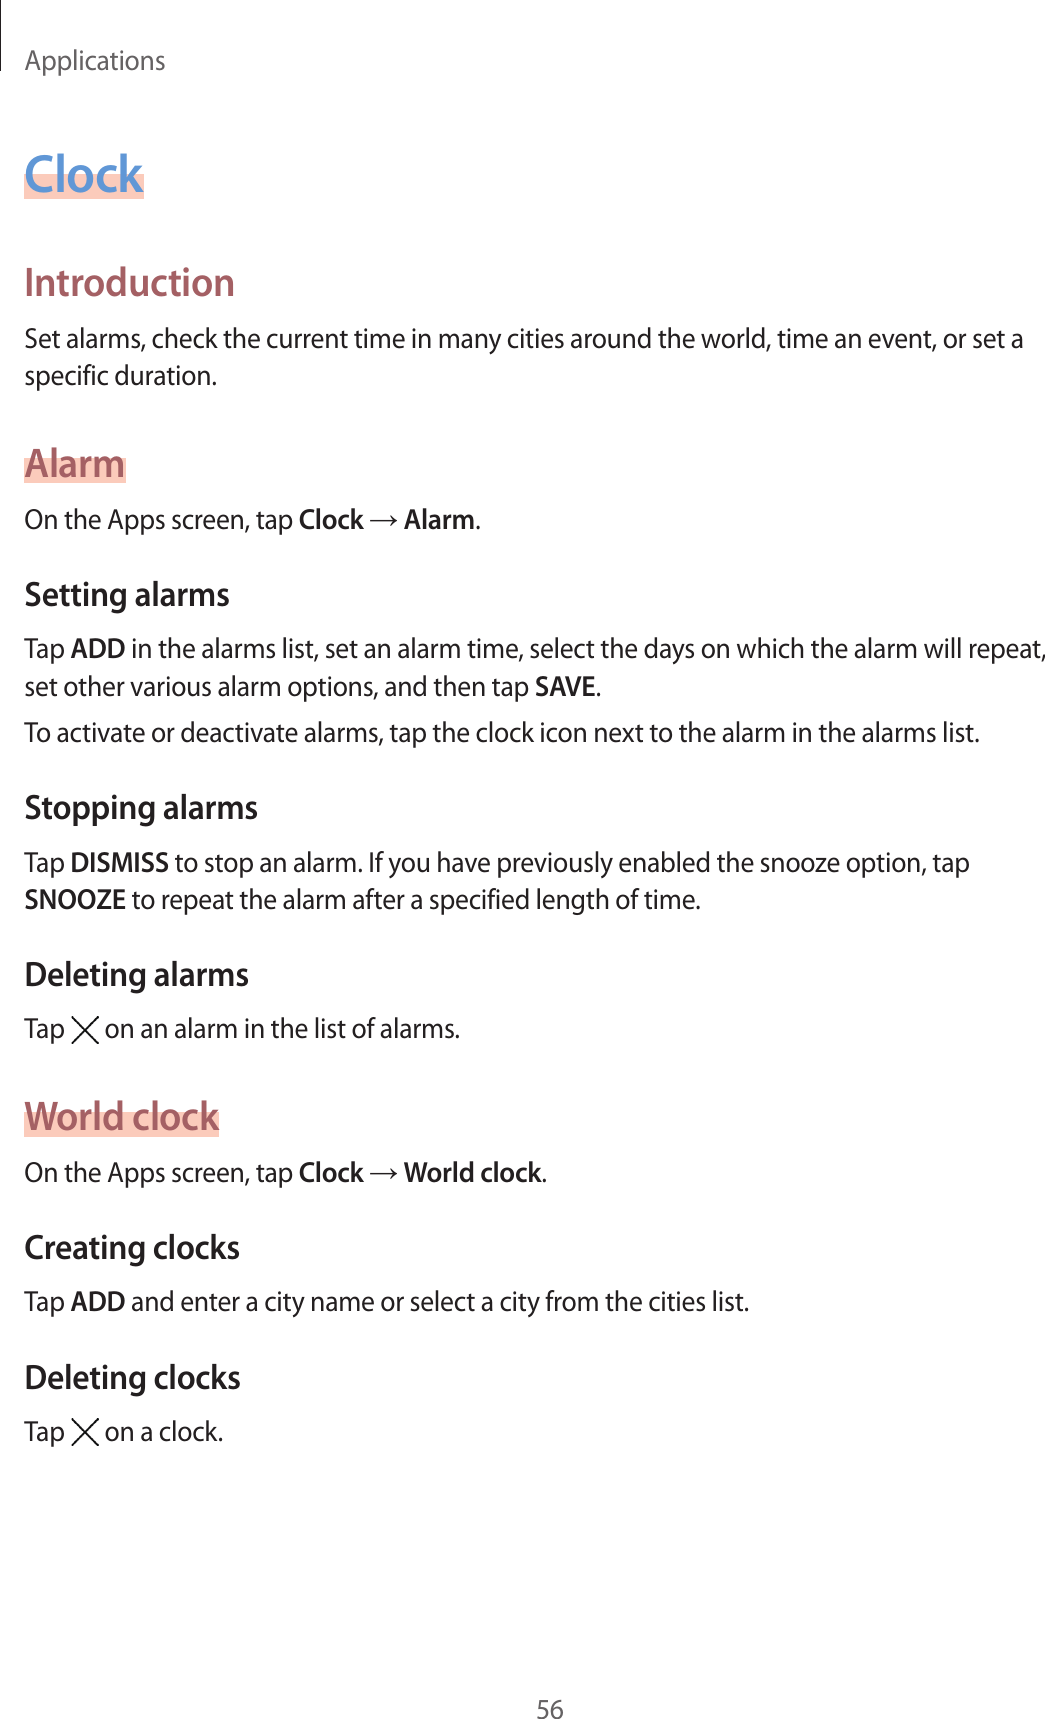 Applications56ClockIntroductionSet alarms, check the current time in many cities around the world, time an event, or set a specific duration.AlarmOn the Apps screen, tap Clock → Alarm.Setting alarmsTap ADD in the alarms list, set an alarm time, select the days on which the alarm will repeat, set other various alarm options, and then tap SAVE.To activate or deactivate alarms, tap the clock icon next to the alarm in the alarms list.Stopping alarmsTap DISMISS to stop an alarm. If you have previously enabled the snooze option, tap SNOOZE to repeat the alarm after a specified length of time.Deleting alarmsTap   on an alarm in the list of alarms.World clockOn the Apps screen, tap Clock → World clock.Creating clocksTap ADD and enter a city name or select a city from the cities list.Deleting clocksTap   on a clock.